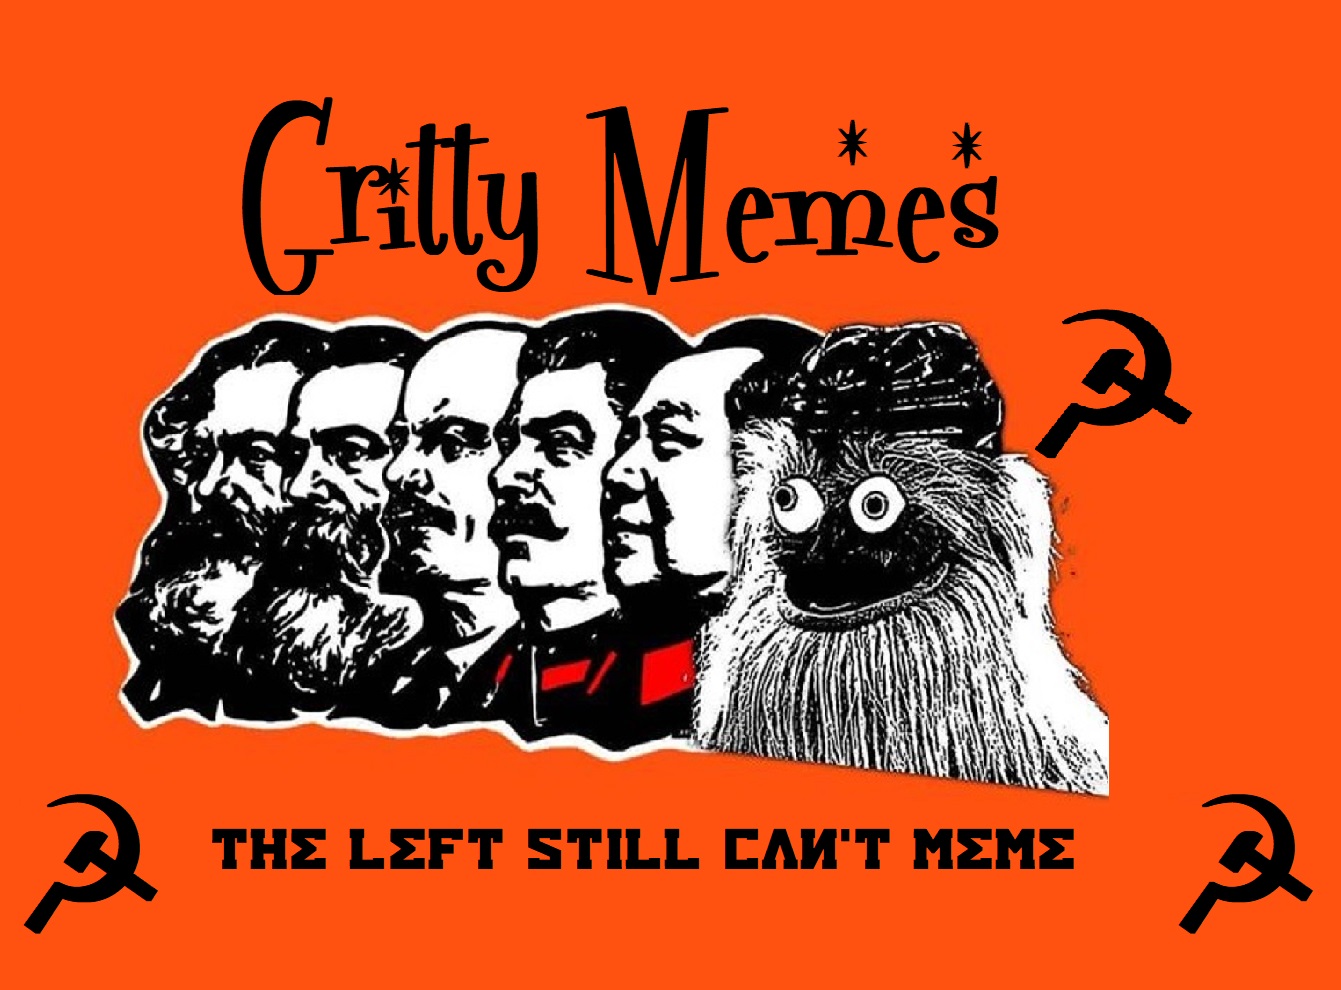 Gritty Memes (The Left STILL Can't Meme) - Steemit.